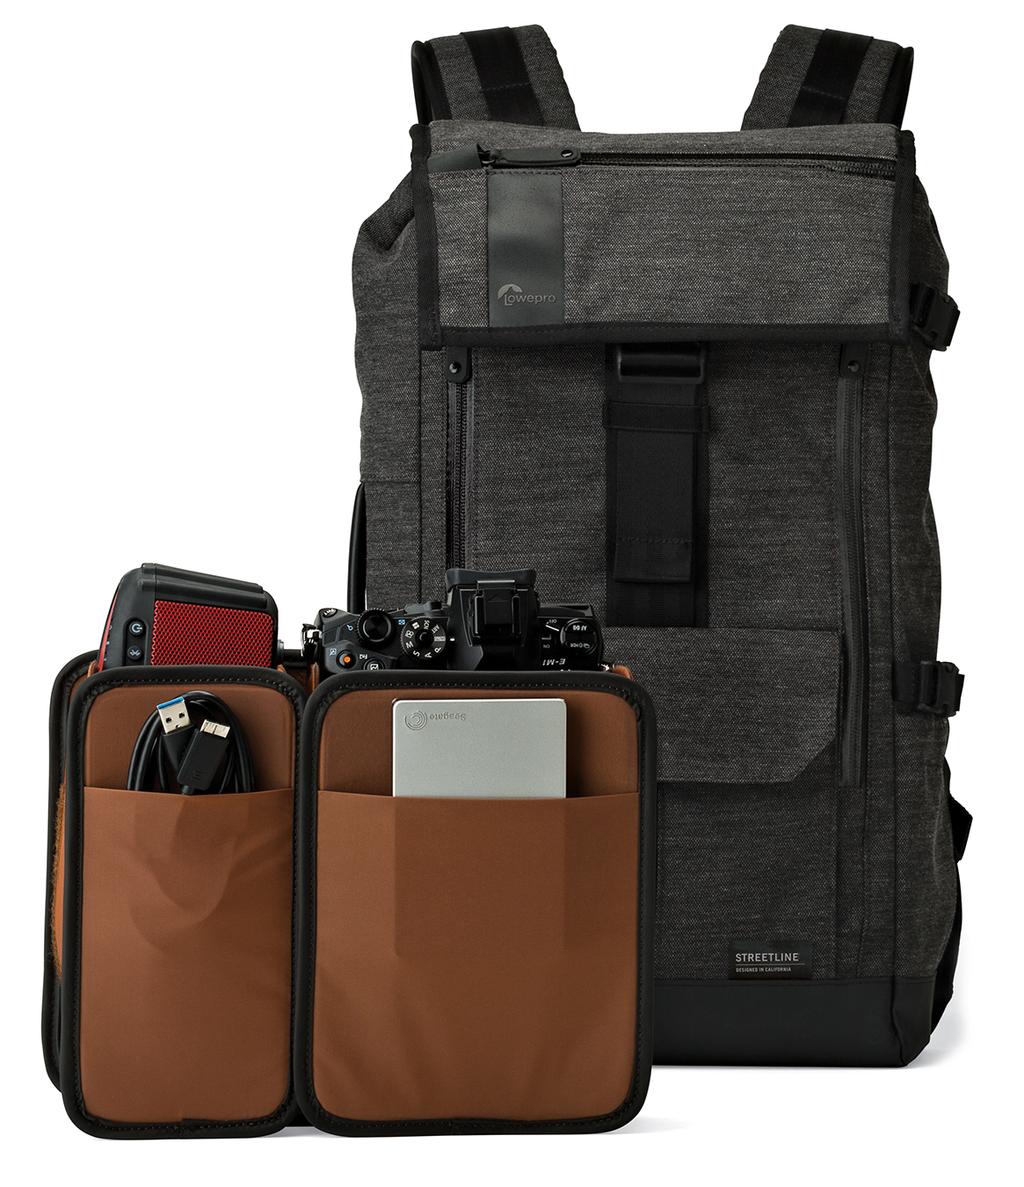 StreetLine BP 250 13" laptop and a tablet As a daypack, the BP 250 fits things like a smartphone, wallet, keys, jacket, hat, passport,